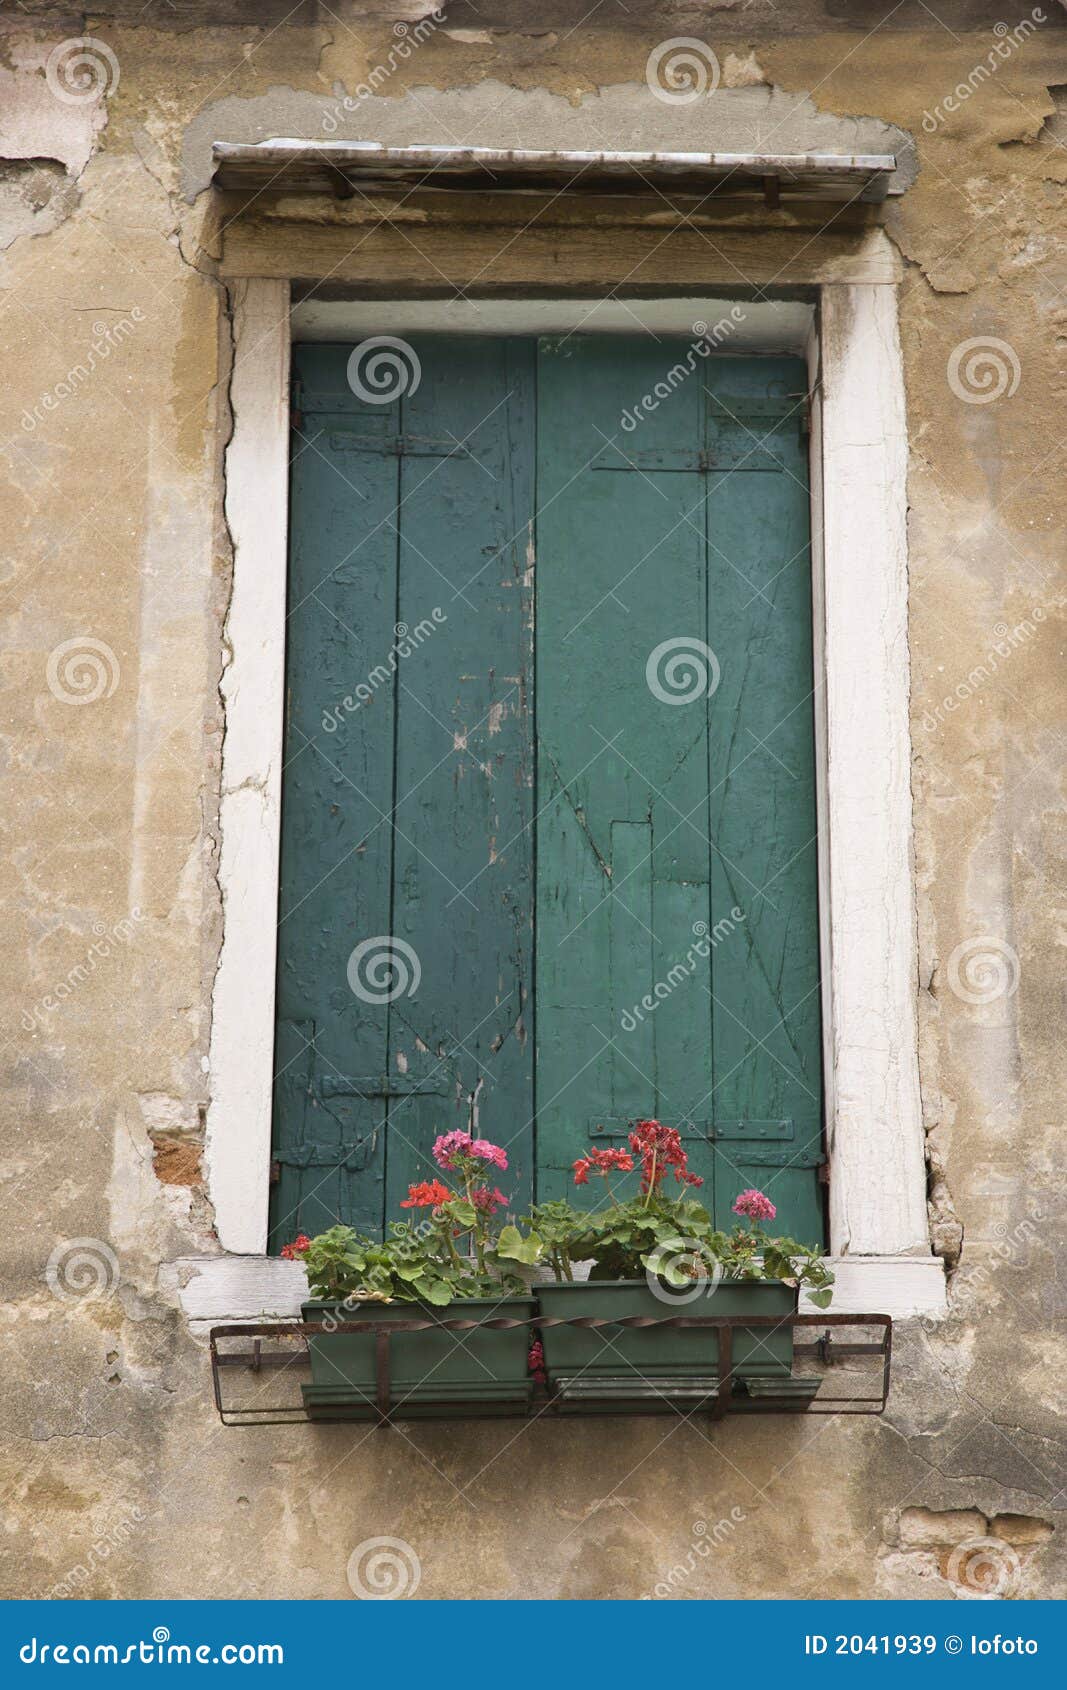 Window With Closed Shutters And Flowers. Royalty Free ...